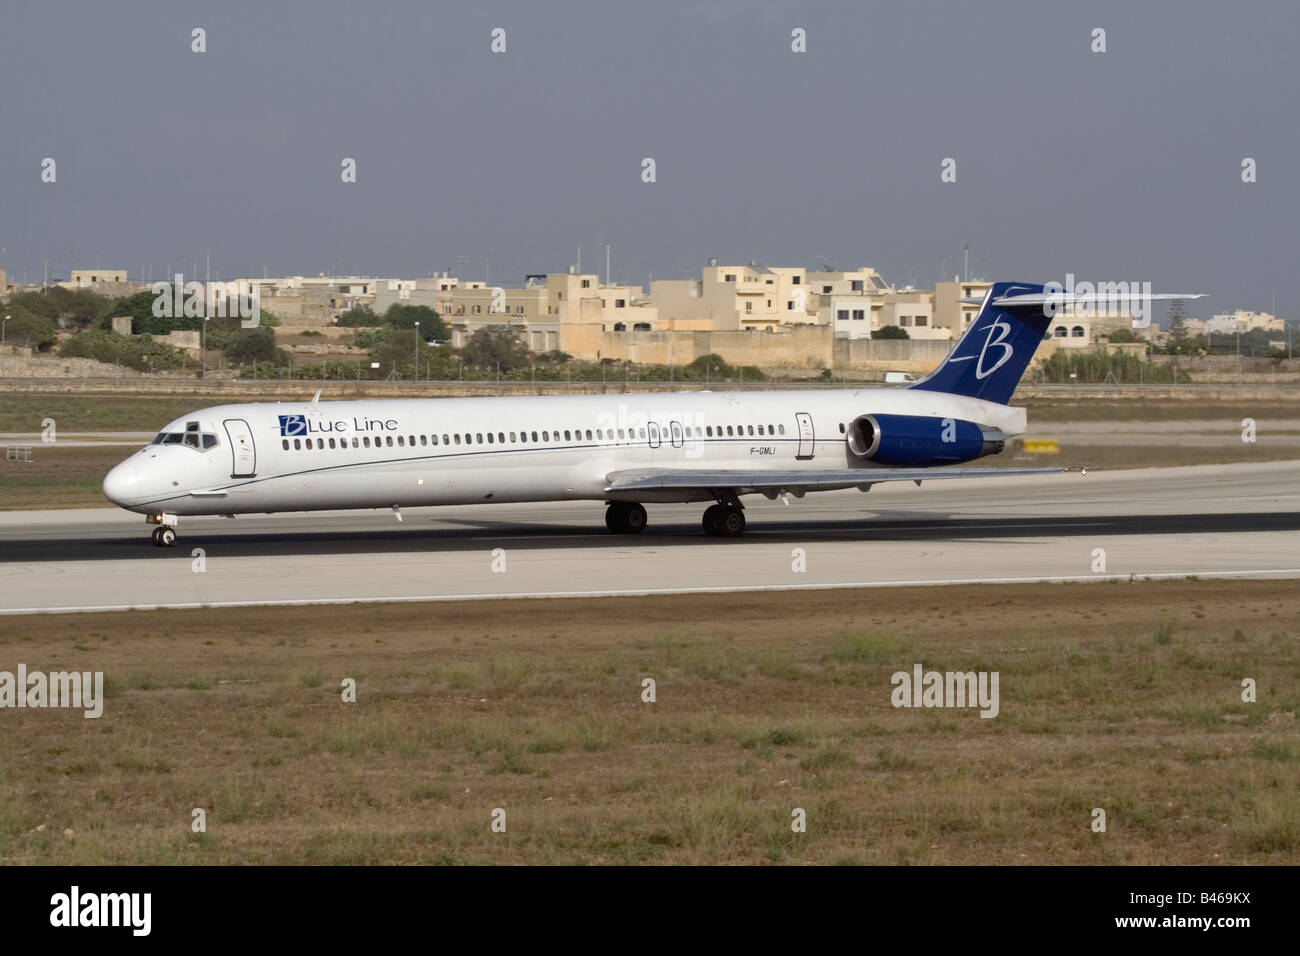 Blue Line MD-83 jet plane accelerating on the runway at Malta International Airport Stock Photo